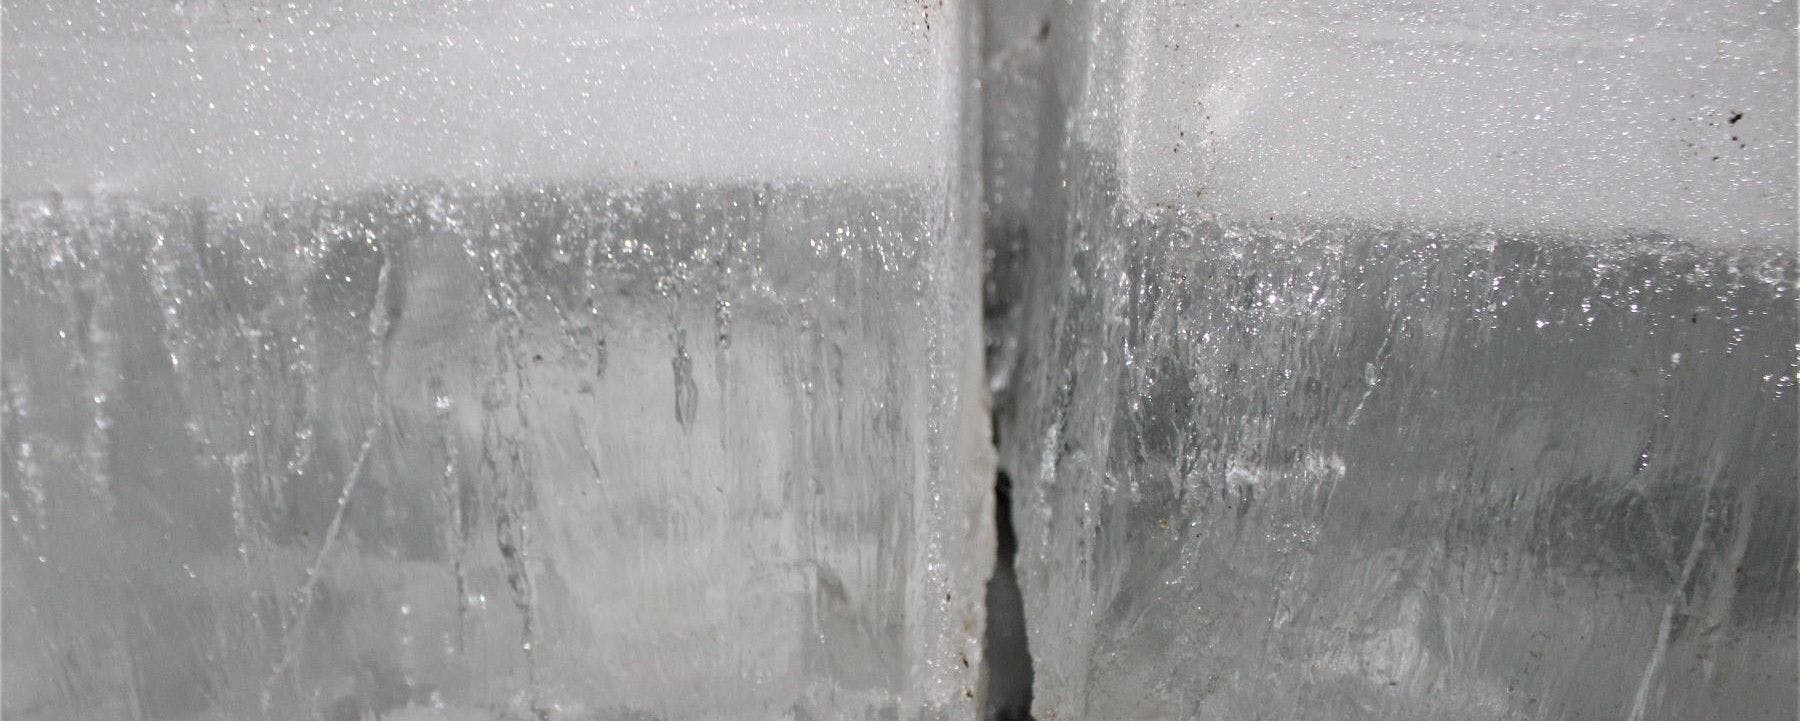 Large chunks of ice shown up close.